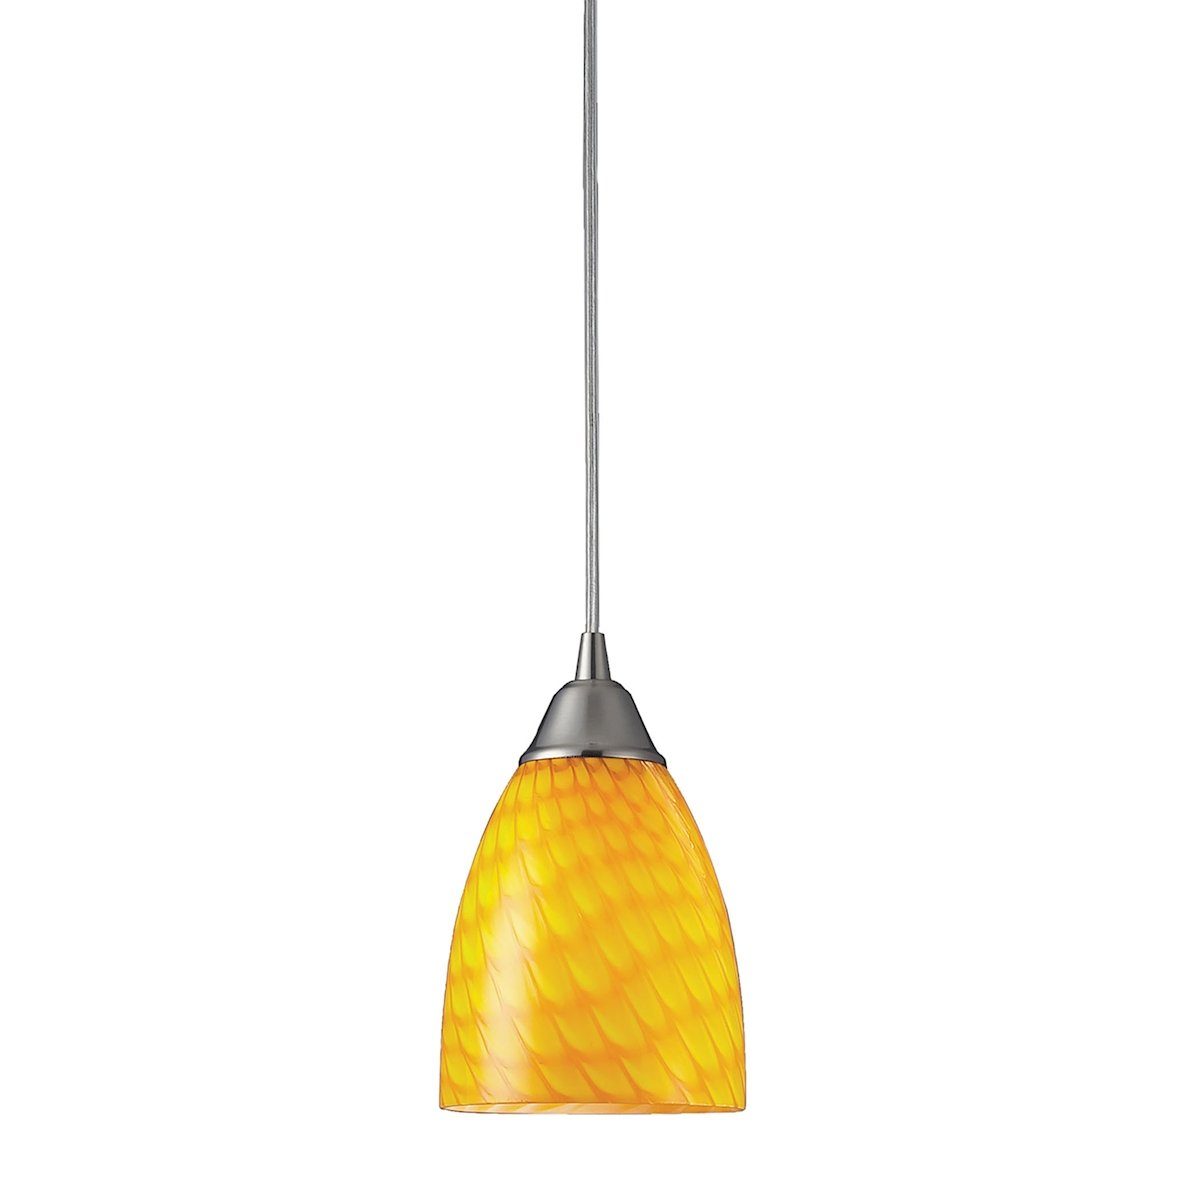 Arco Baleno 1 Light LED Pendant In Satin Nickel And Canary Glass Ceiling Elk Lighting 